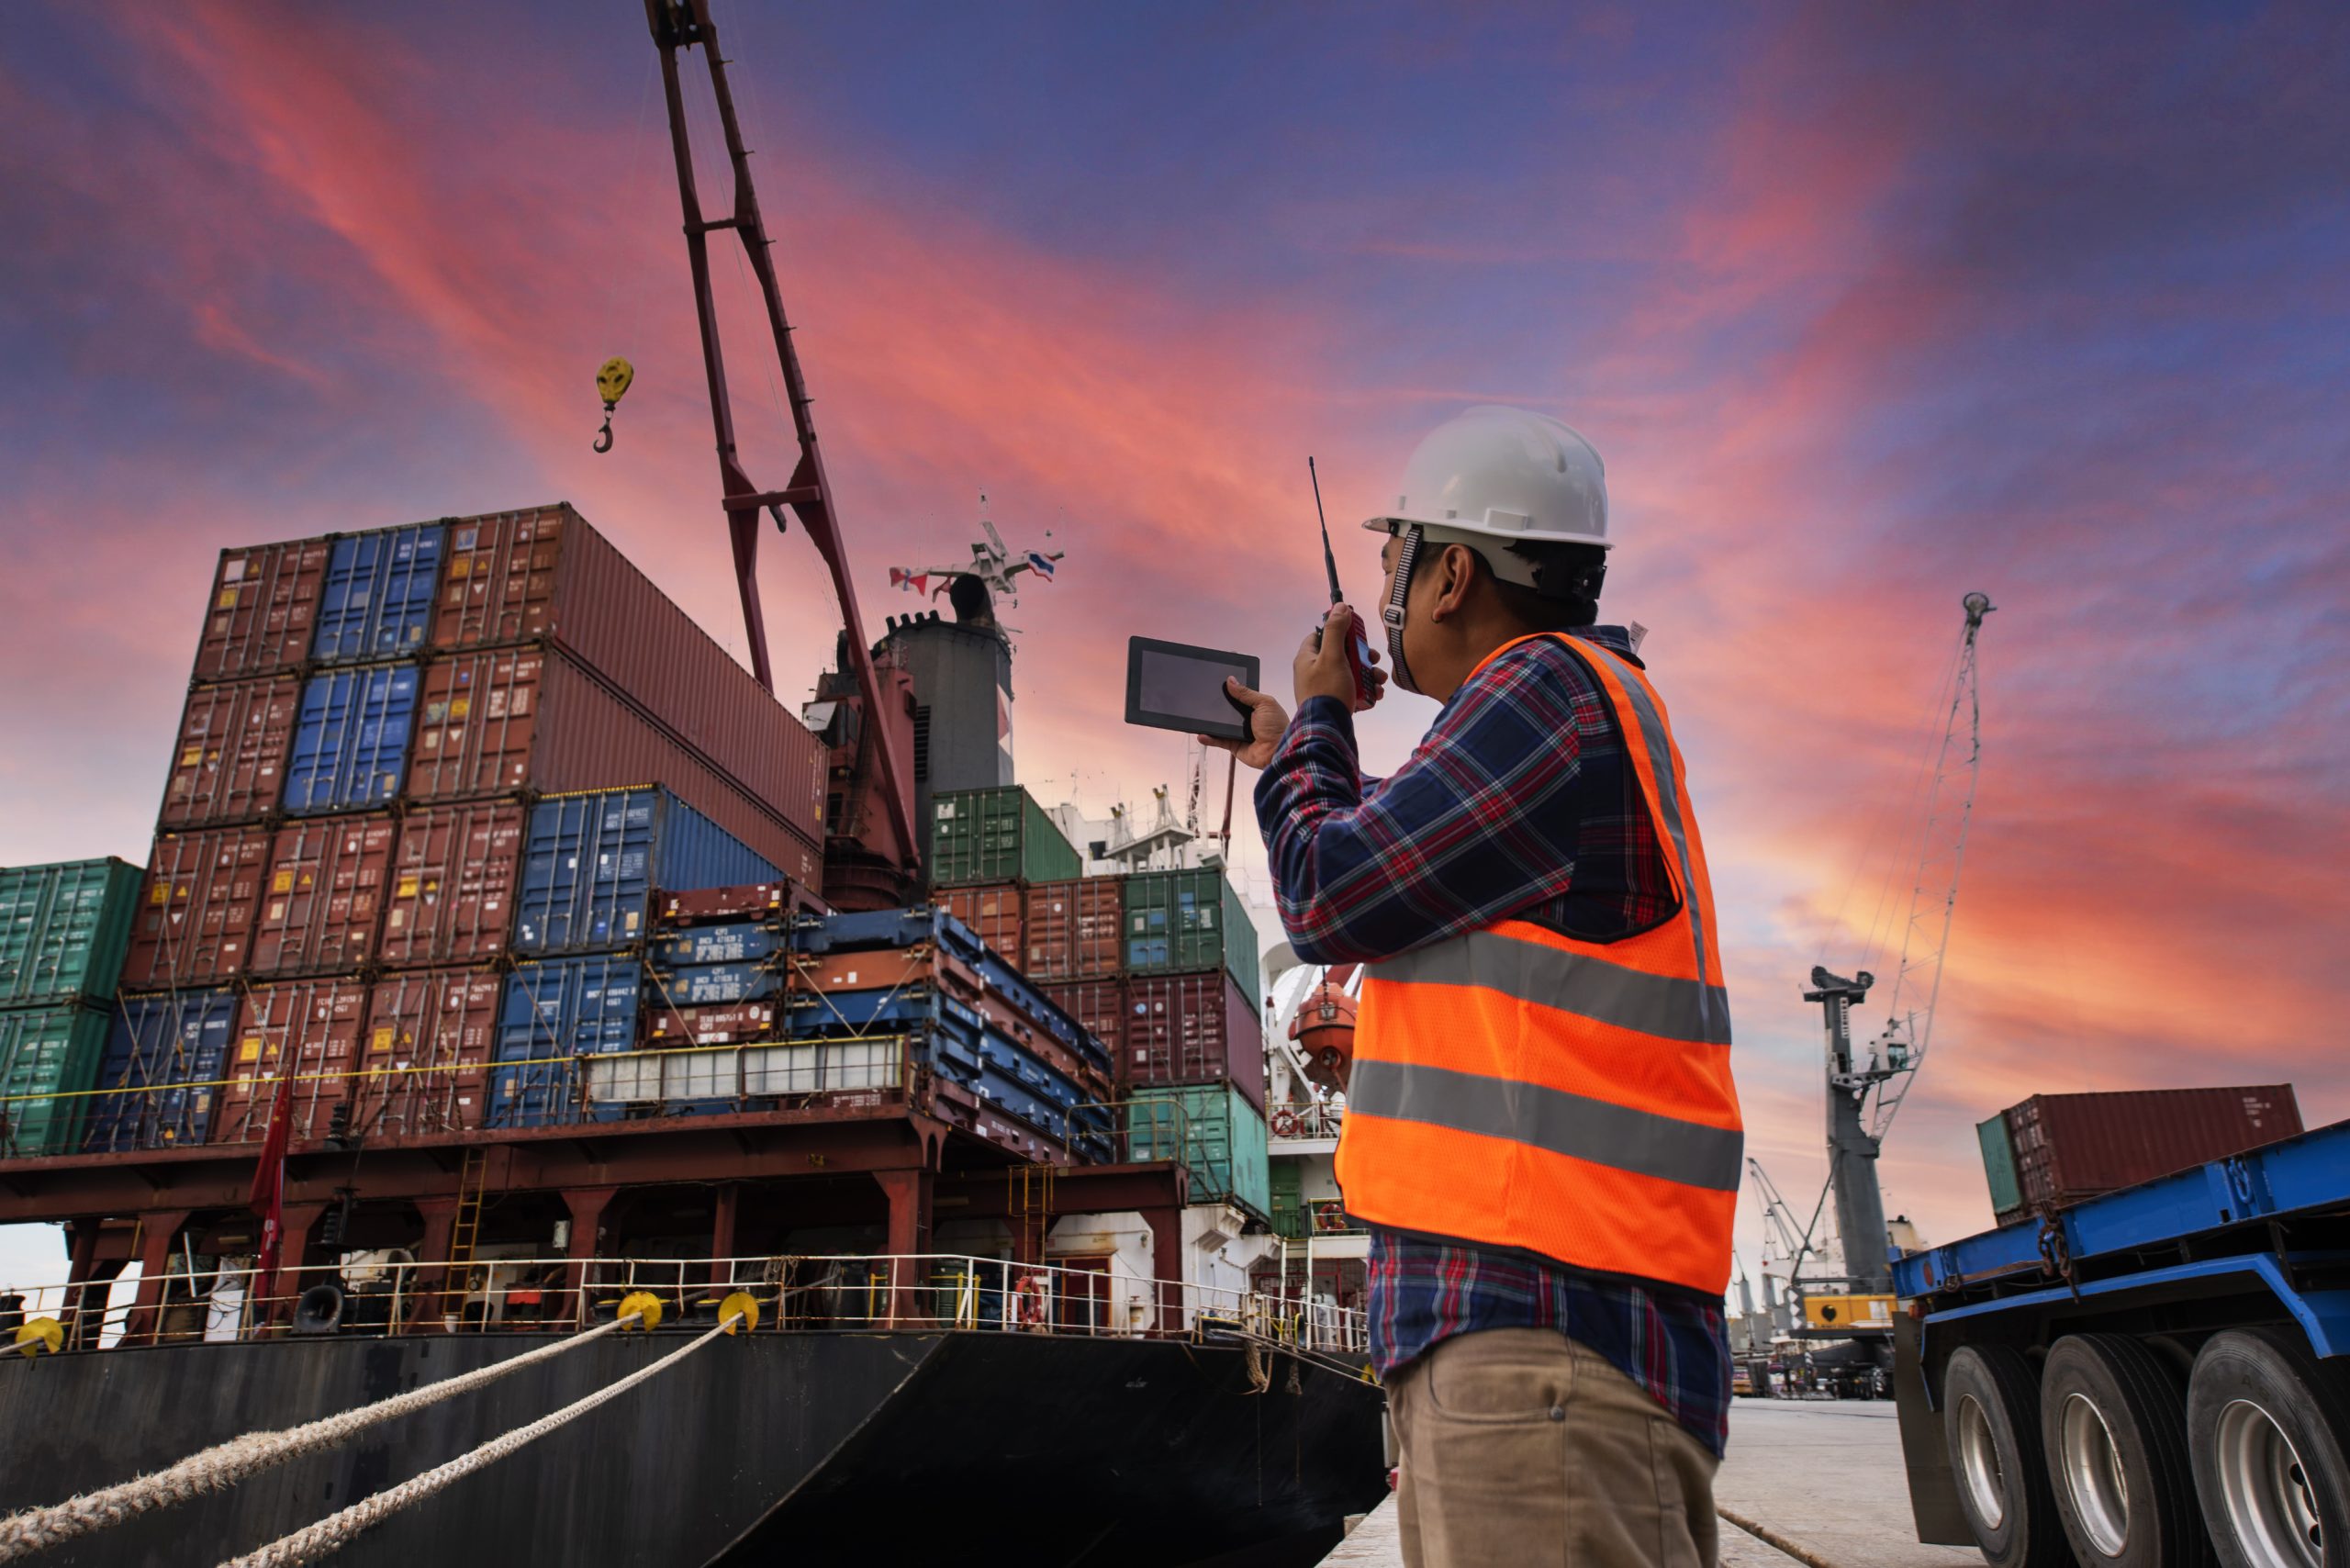 Malaysia port industry: Favorable outlook for 2022